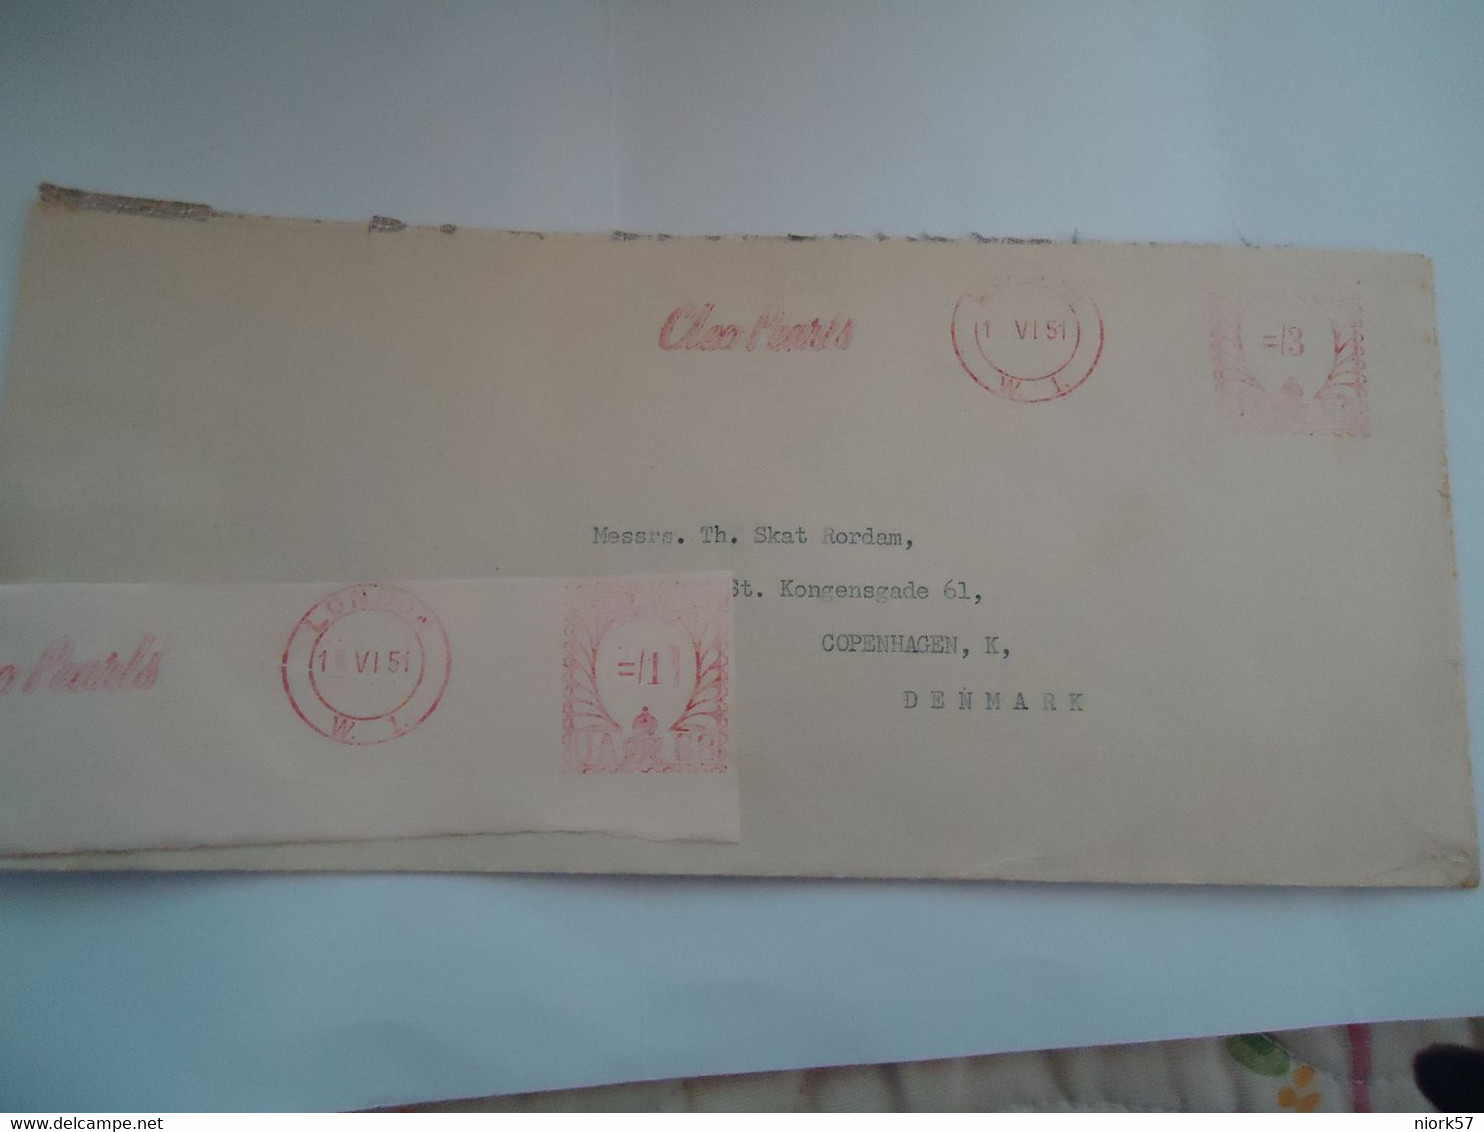 DENMARK COVER 1951    STAMPED  AND MACHINE STAMPS LONDON - Cartes-maximum (CM)